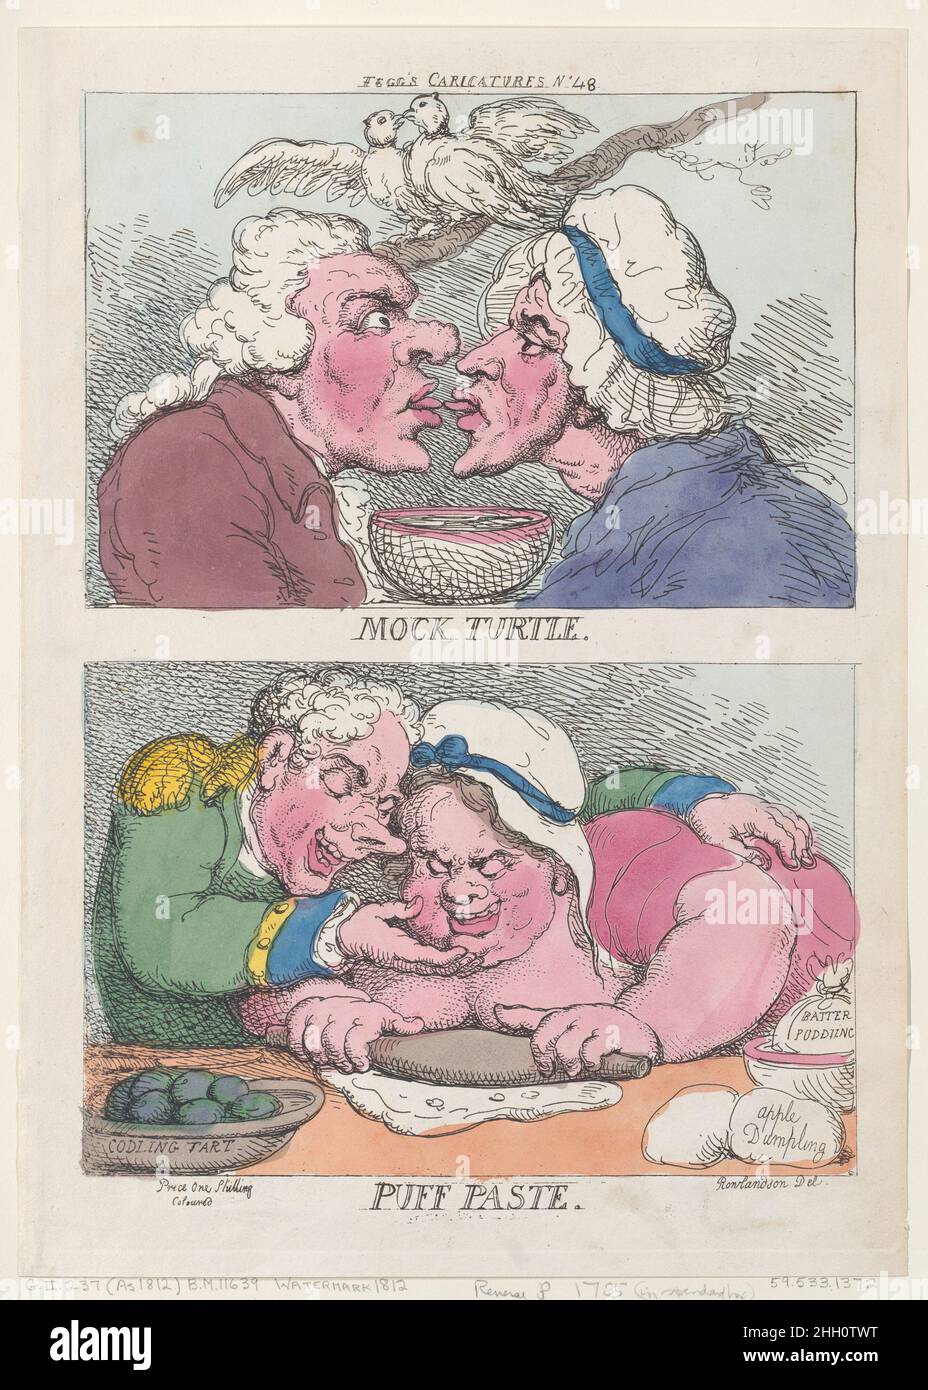 Mock Turtle; Puff Paste 1812? Thomas Rowlandson Two designs on one plate: at top, a couple touches tongues over a bowl, with two doves on a branch above. Below, a woman rolls dough while a man puts his arm around her and touches her chin.. Mock Turtle; Puff Paste. Thomas Rowlandson (British, London 1757–1827 London). 1812?. Hand-colored etching. Thomas Tegg (British, 1776–1846). Prints Stock Photo